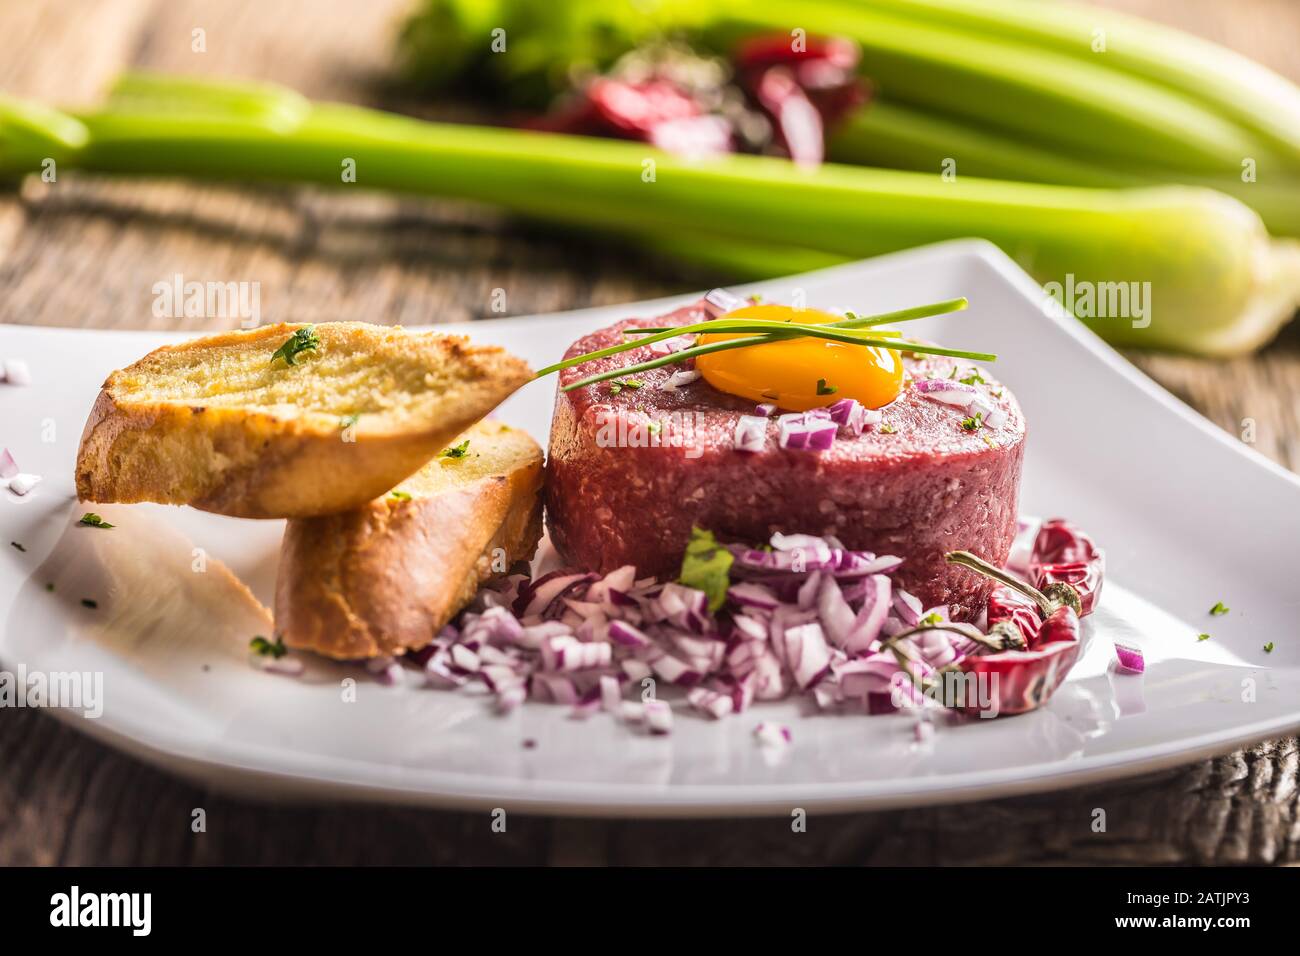 Beef tartare with egg yolk red onion chili peppers herbs and bruschetta Stock Photo